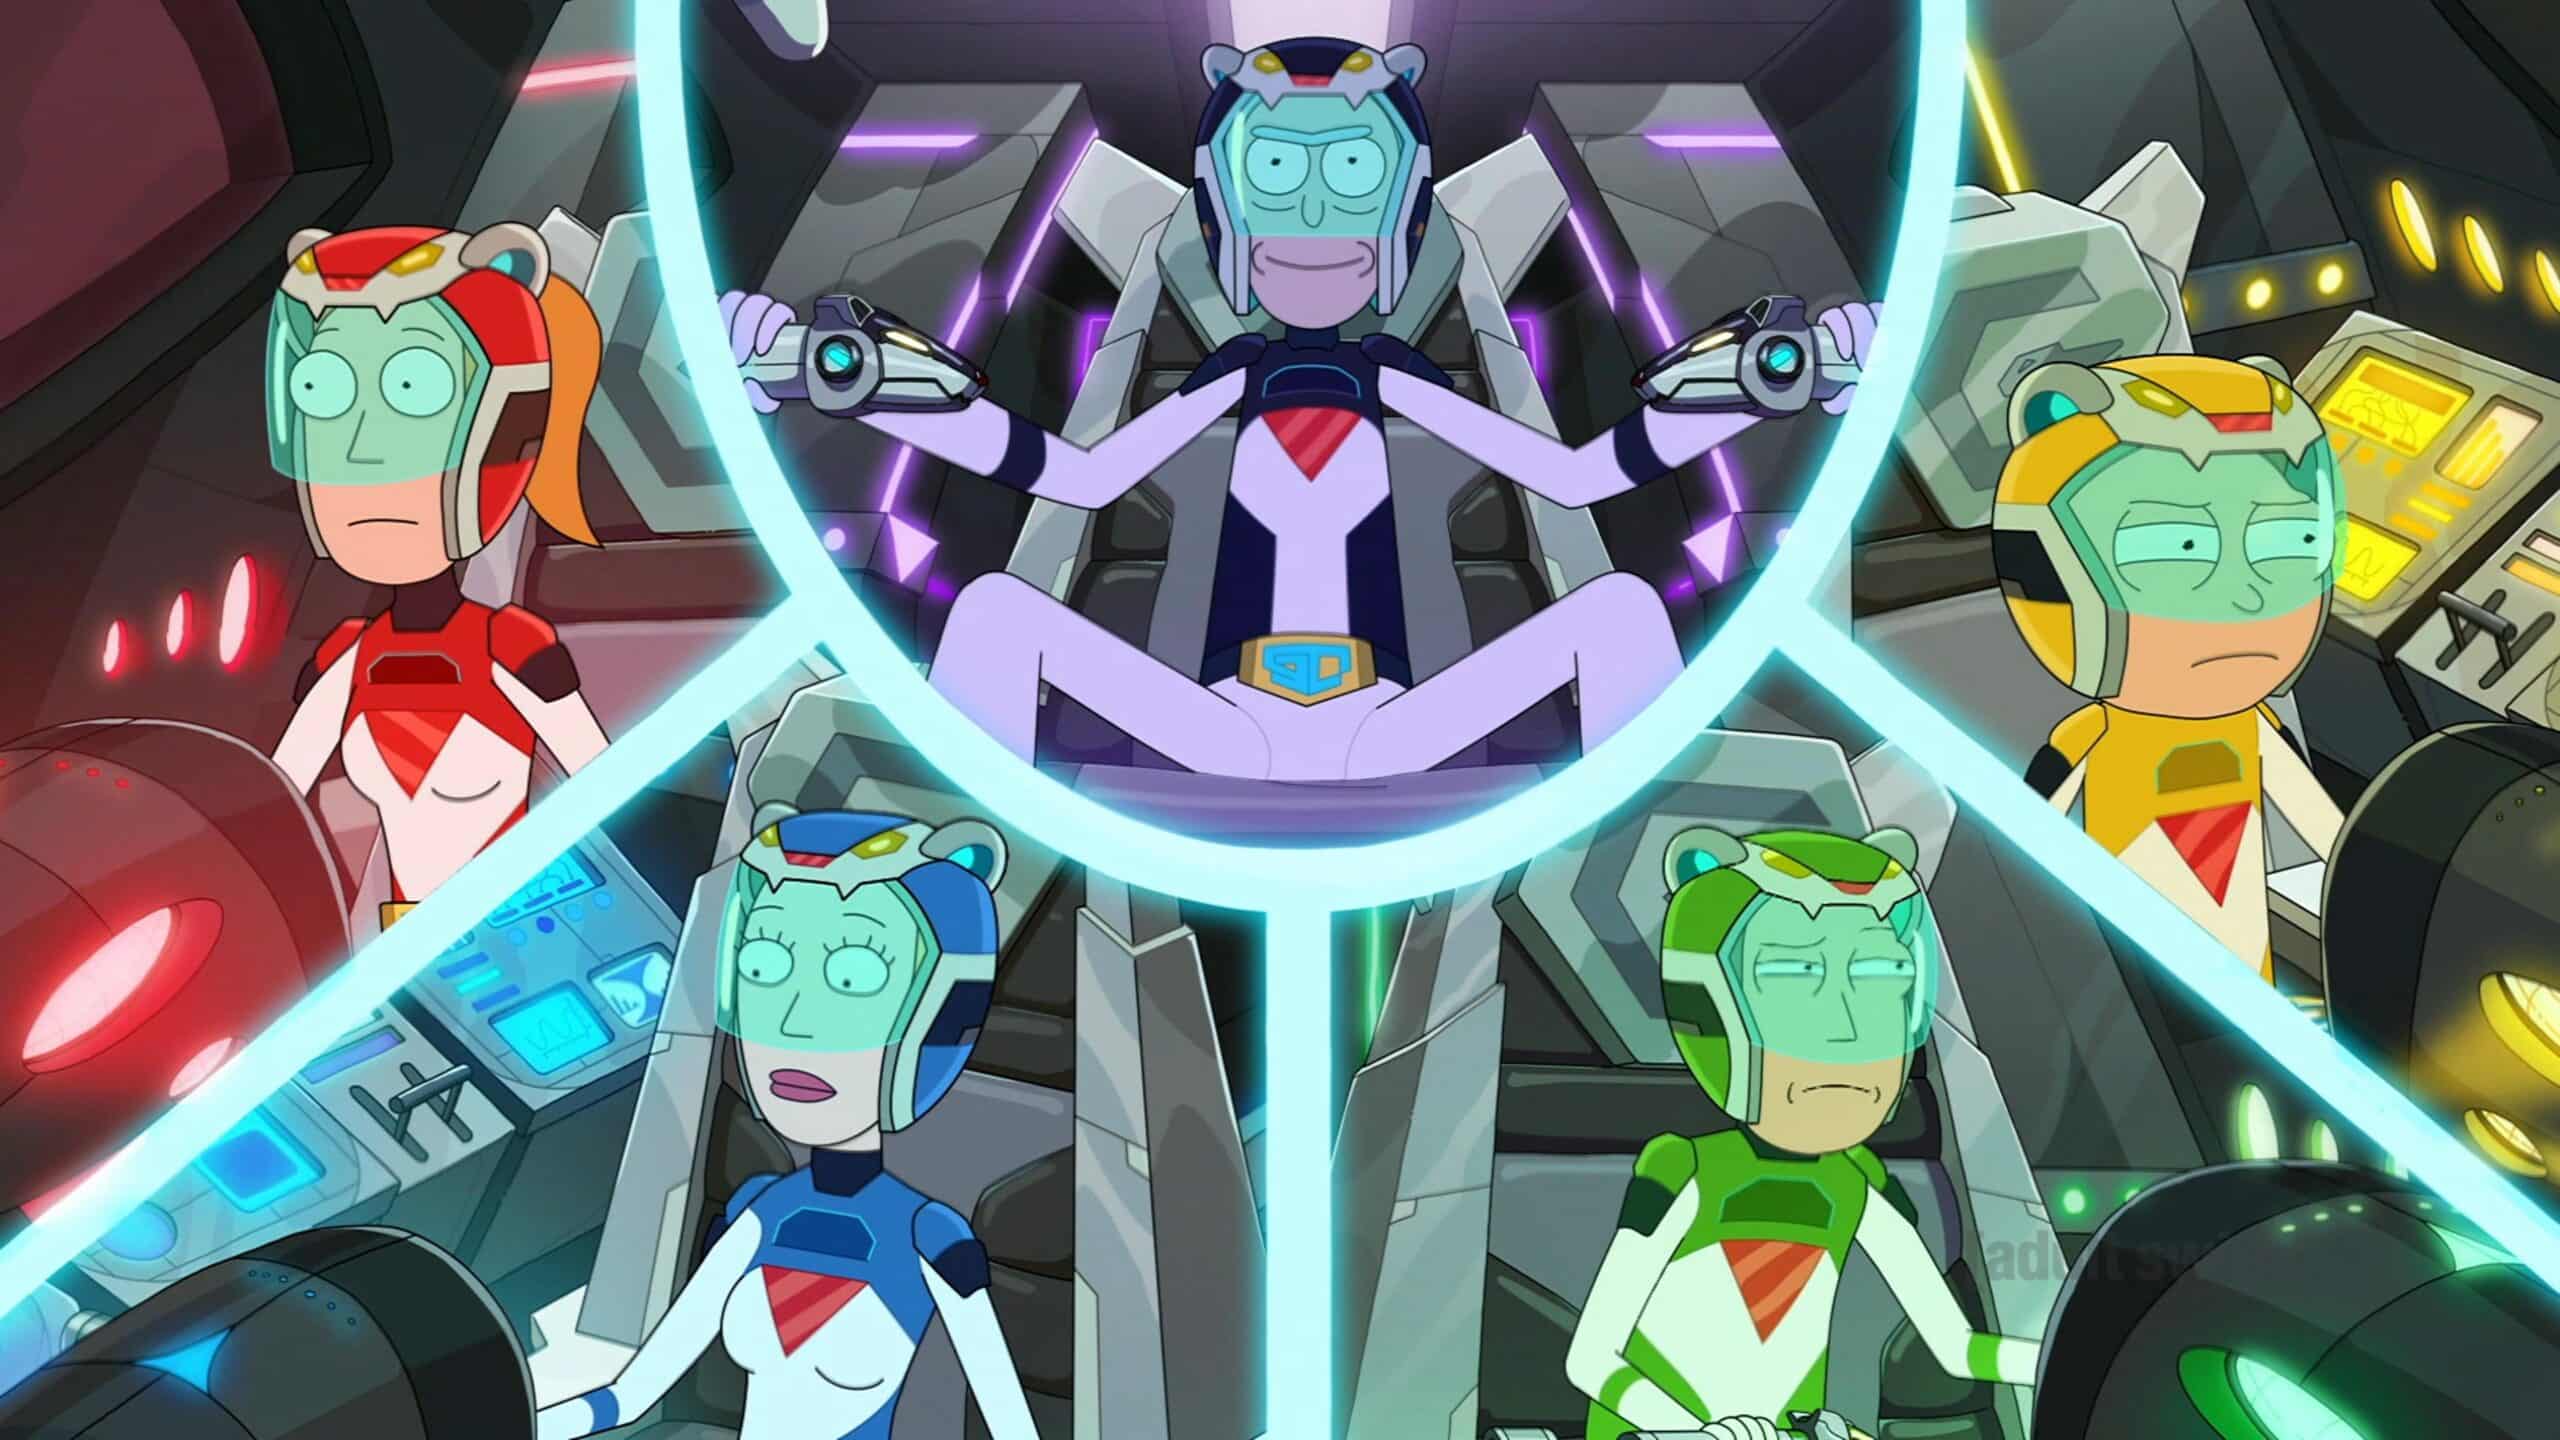 Rick Sanchez and the Smith family in Rick and Morty